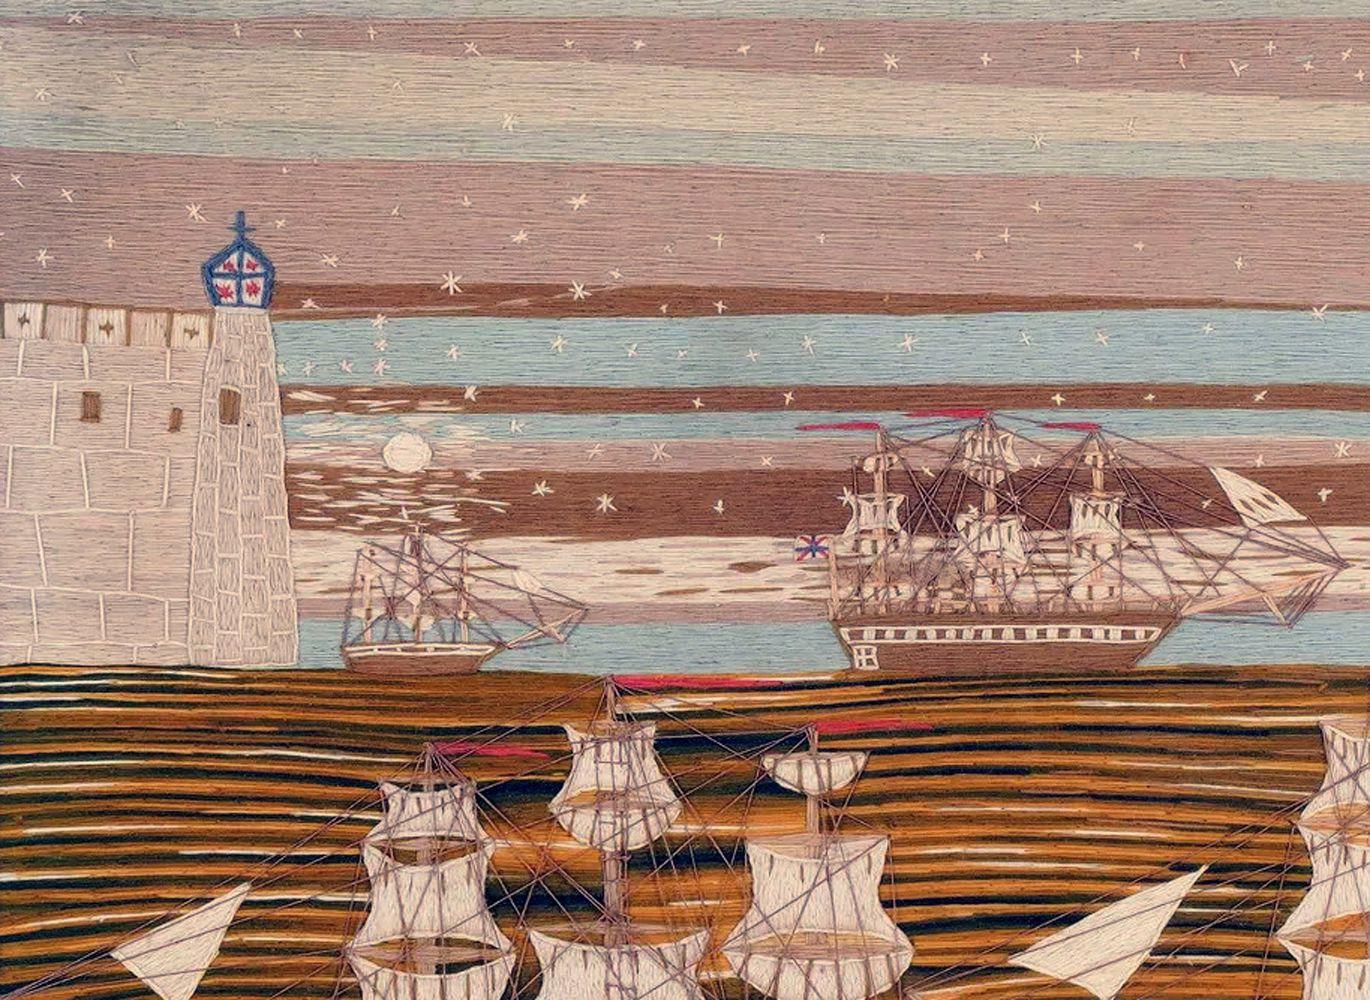 British Sailor's Woolwork with Four Ships Sailing Under Star Light,
Circa 1860-75
 
The unusual large British sailor's woolie depicts a scene from the Crimea War period under star light.  A large fort can be seen on the left with a tower showing